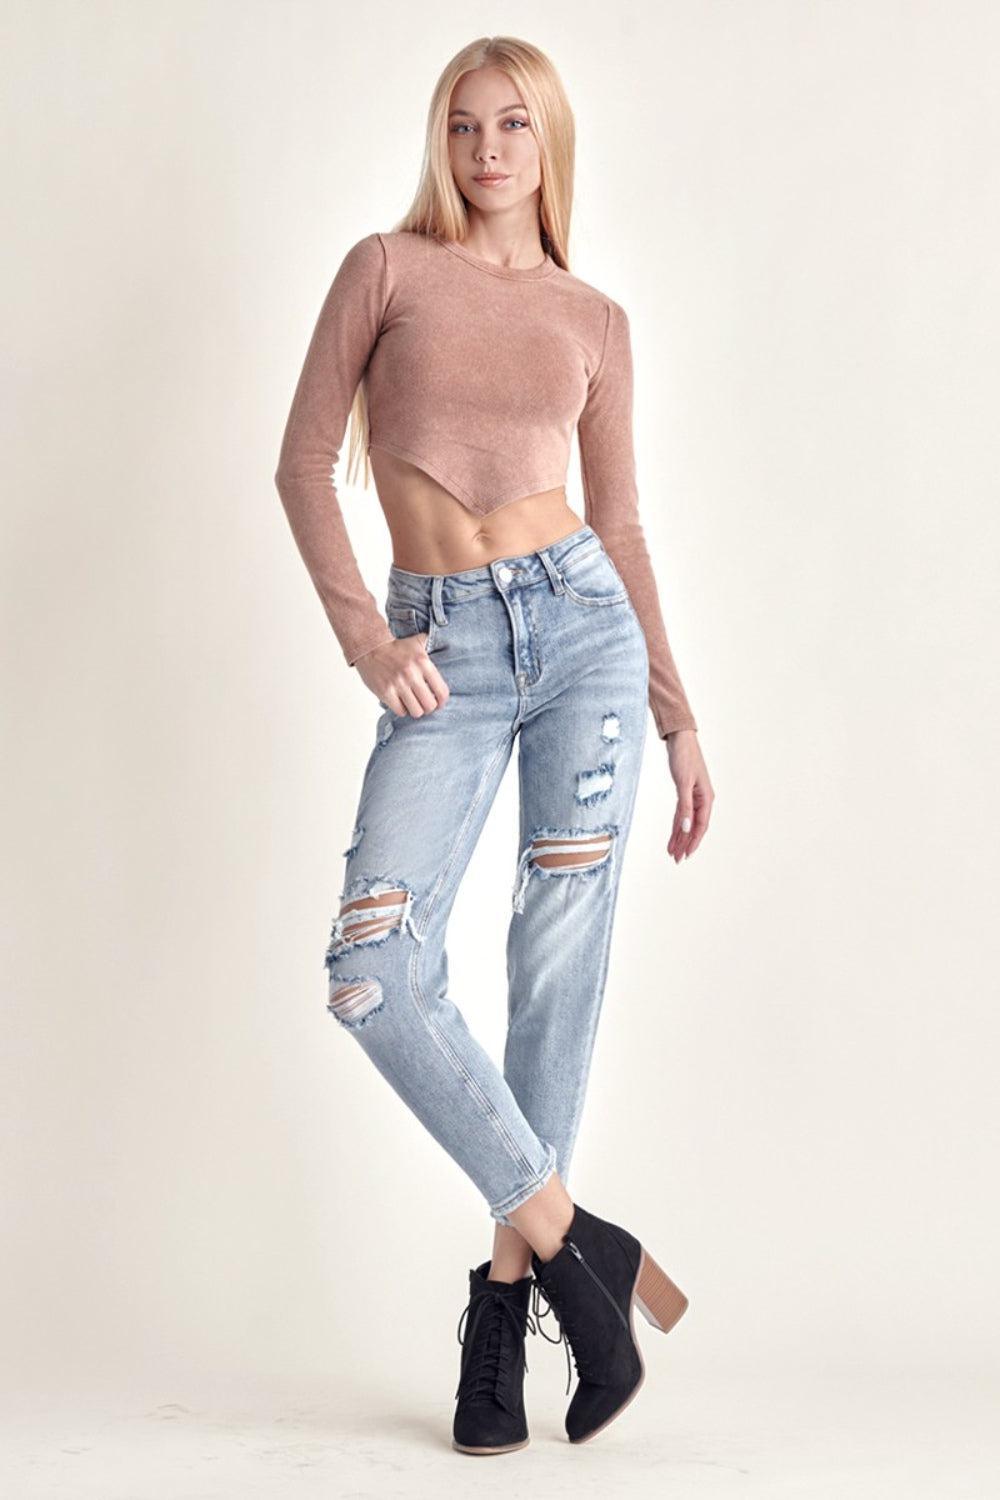 a woman wearing ripped jeans and a crop top